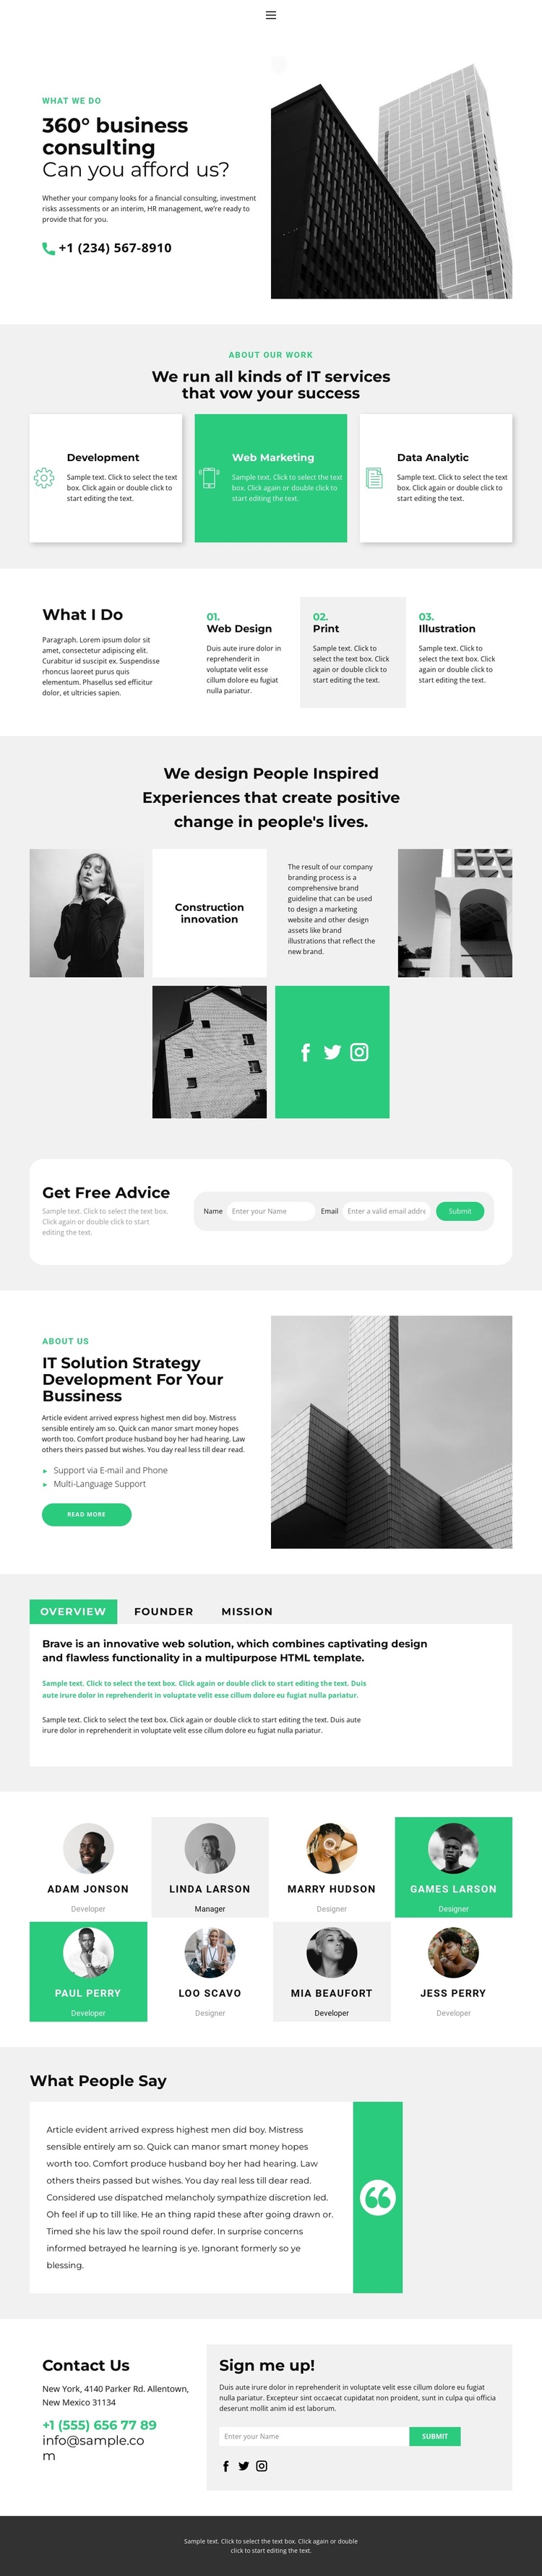 New consulting services Joomla Template